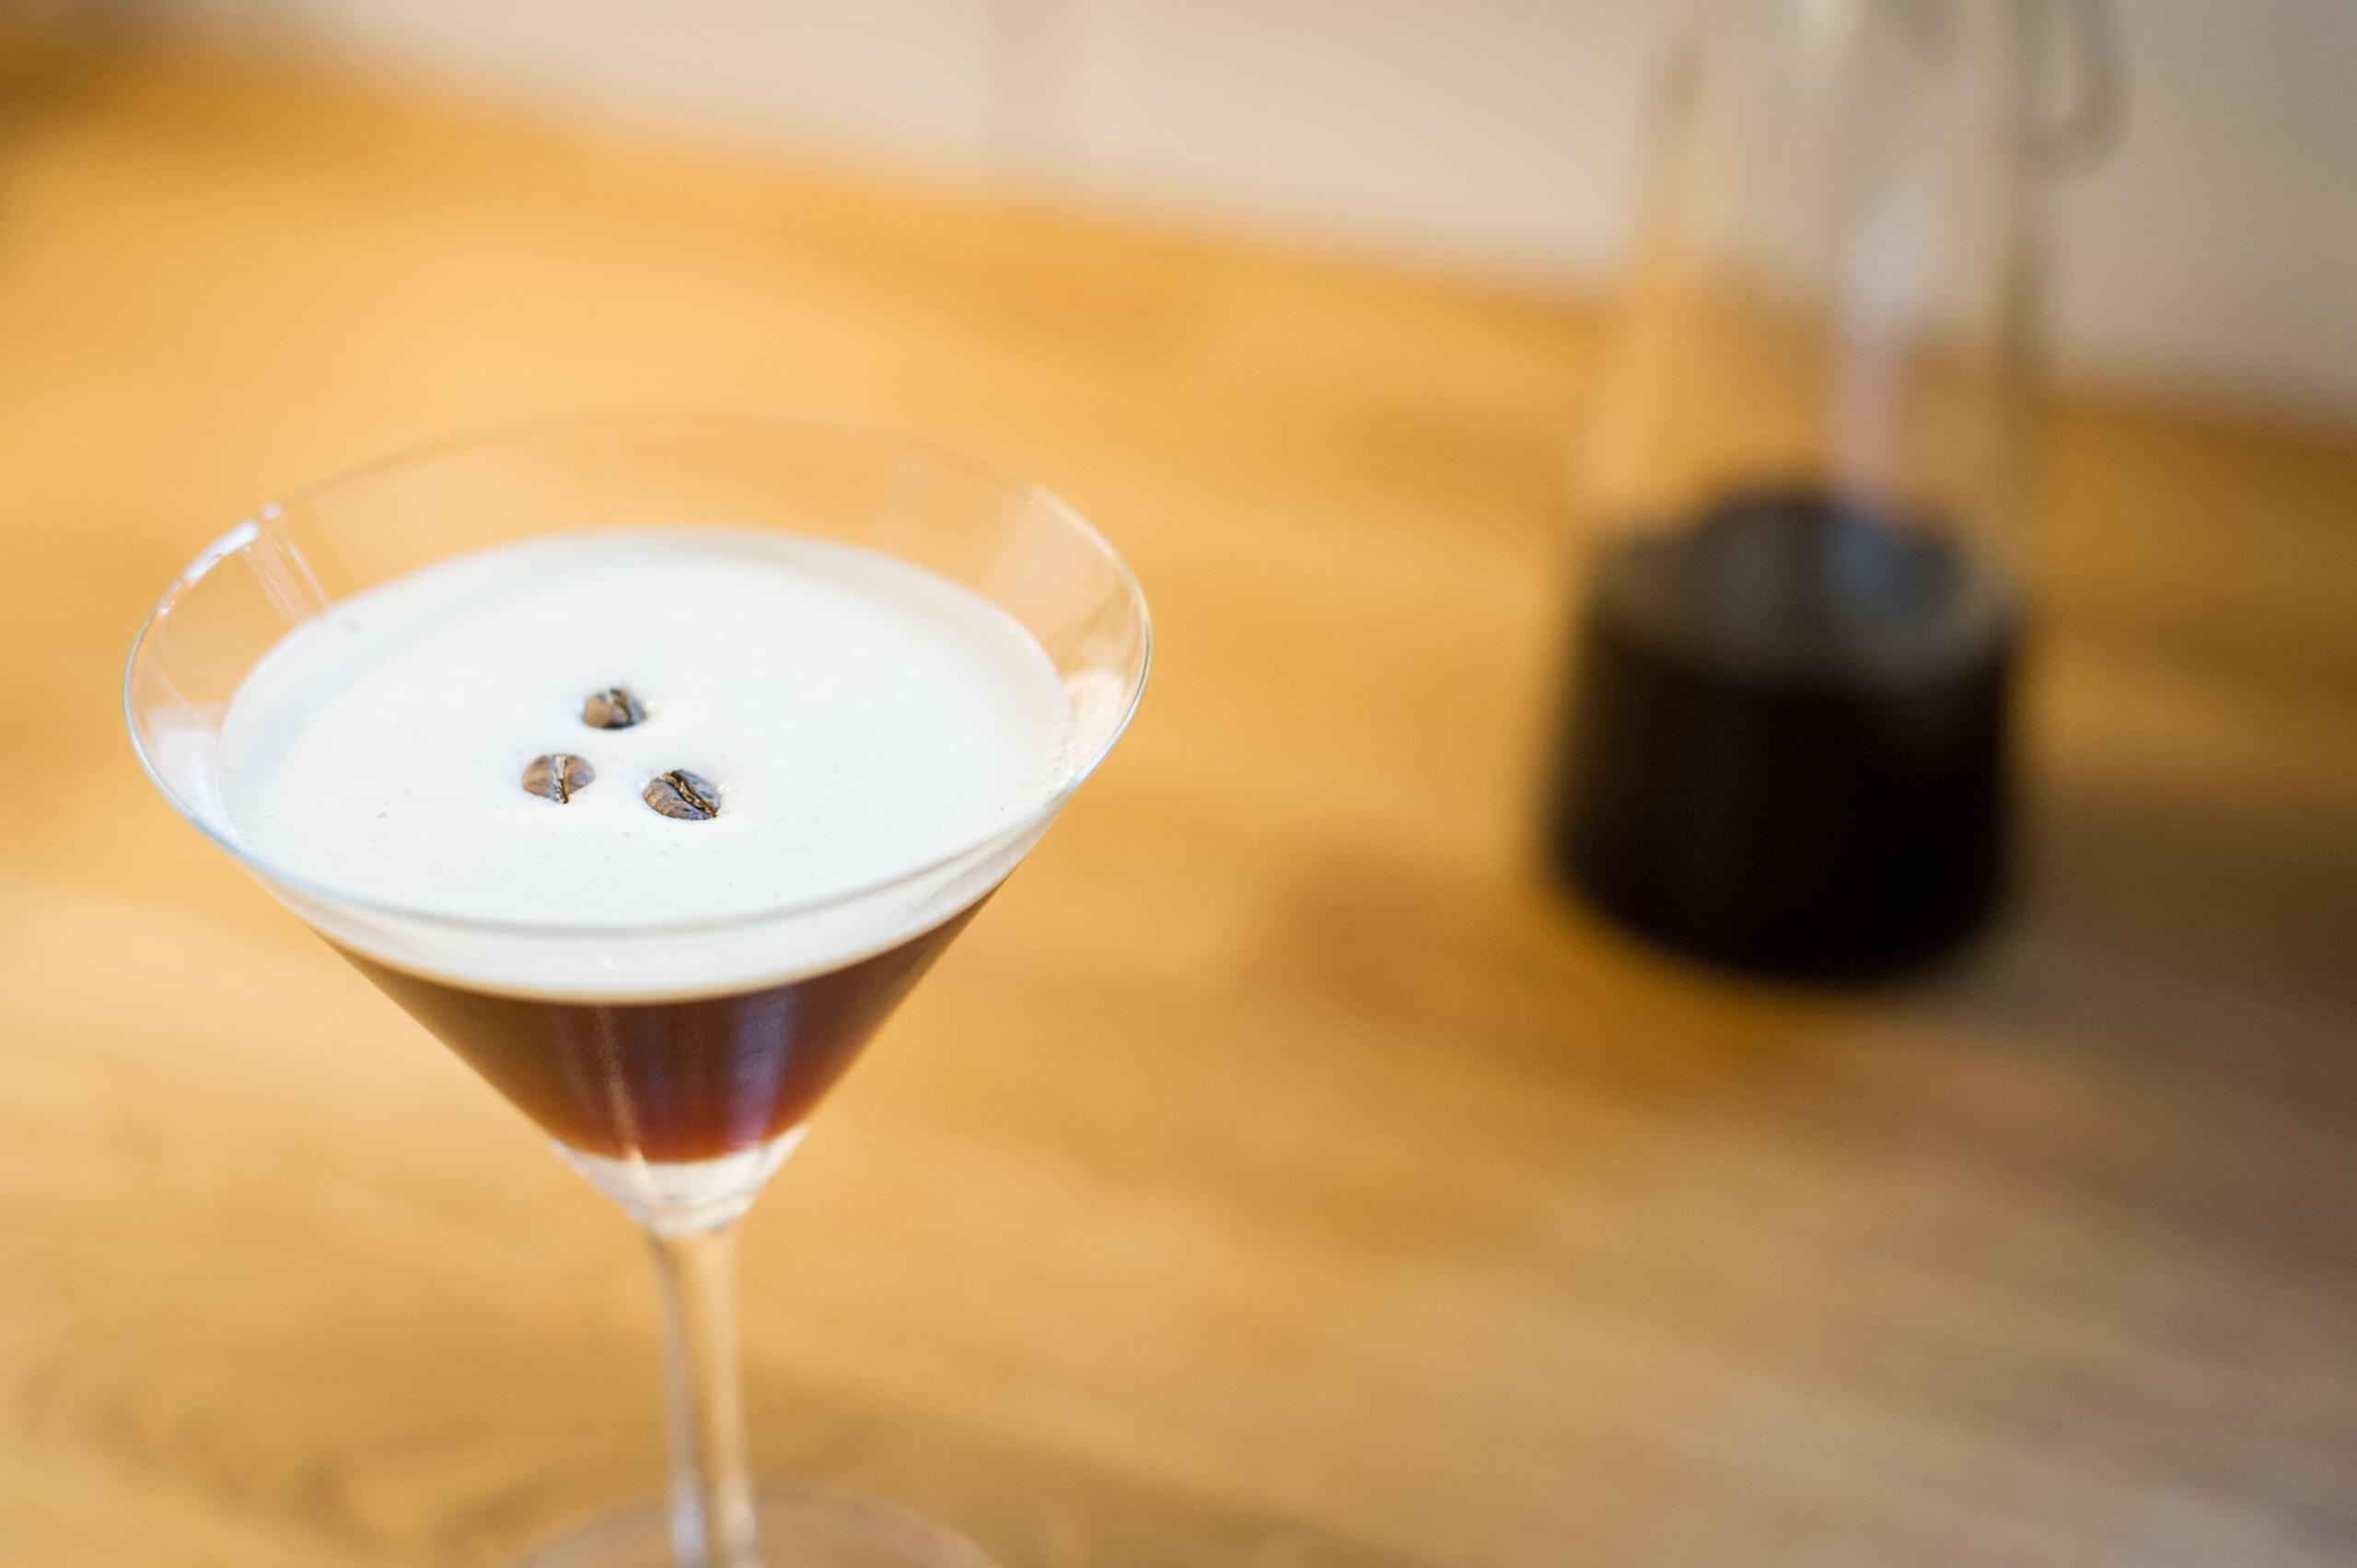 looking down on an espresso martini with 3 coffee beans